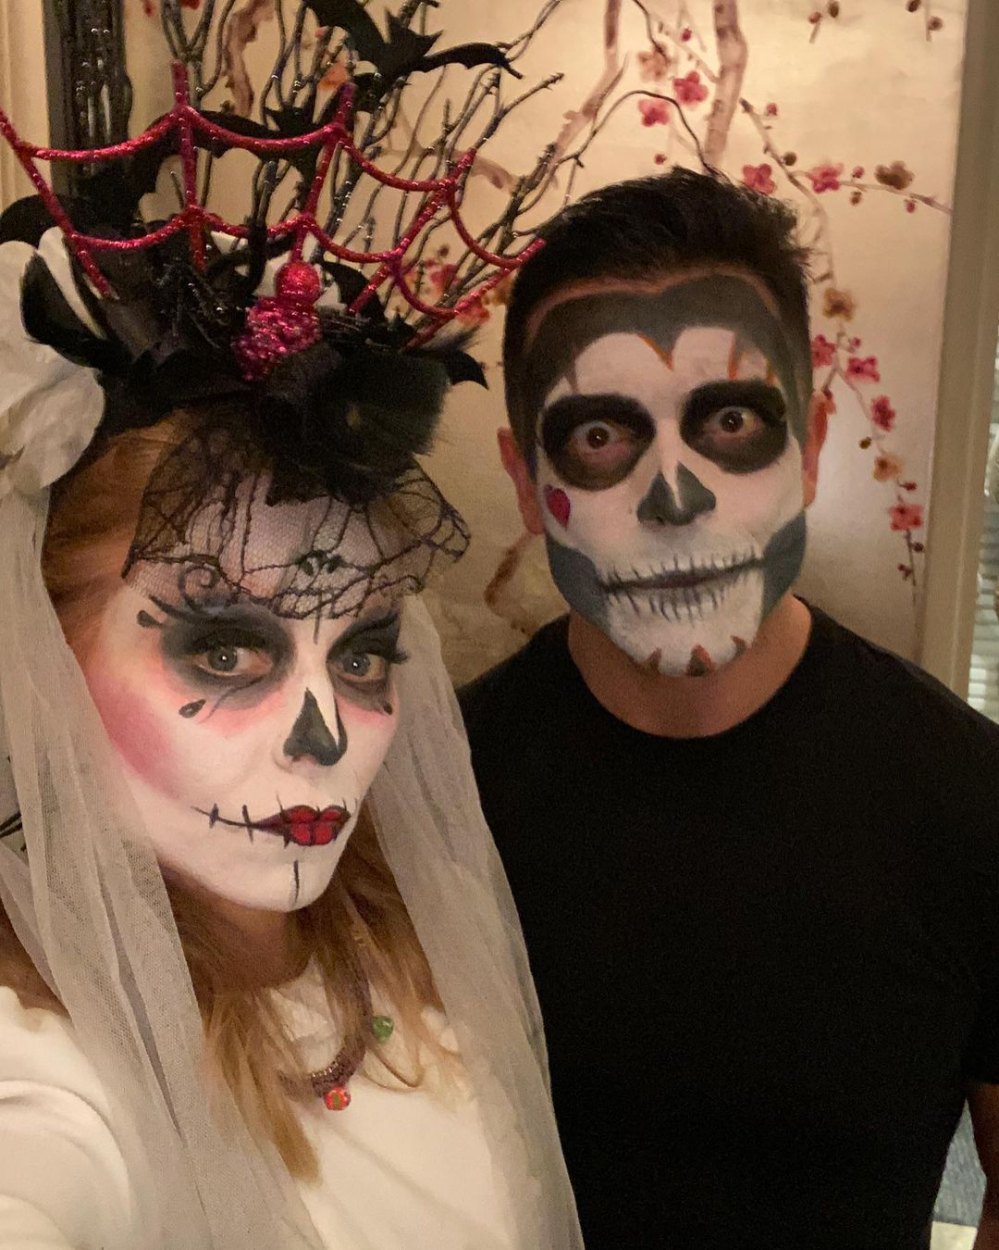 Kelly Ripa Crops Husband Mark Consuelos' Crotch Out of New Halloween Pic After Fan Speculation